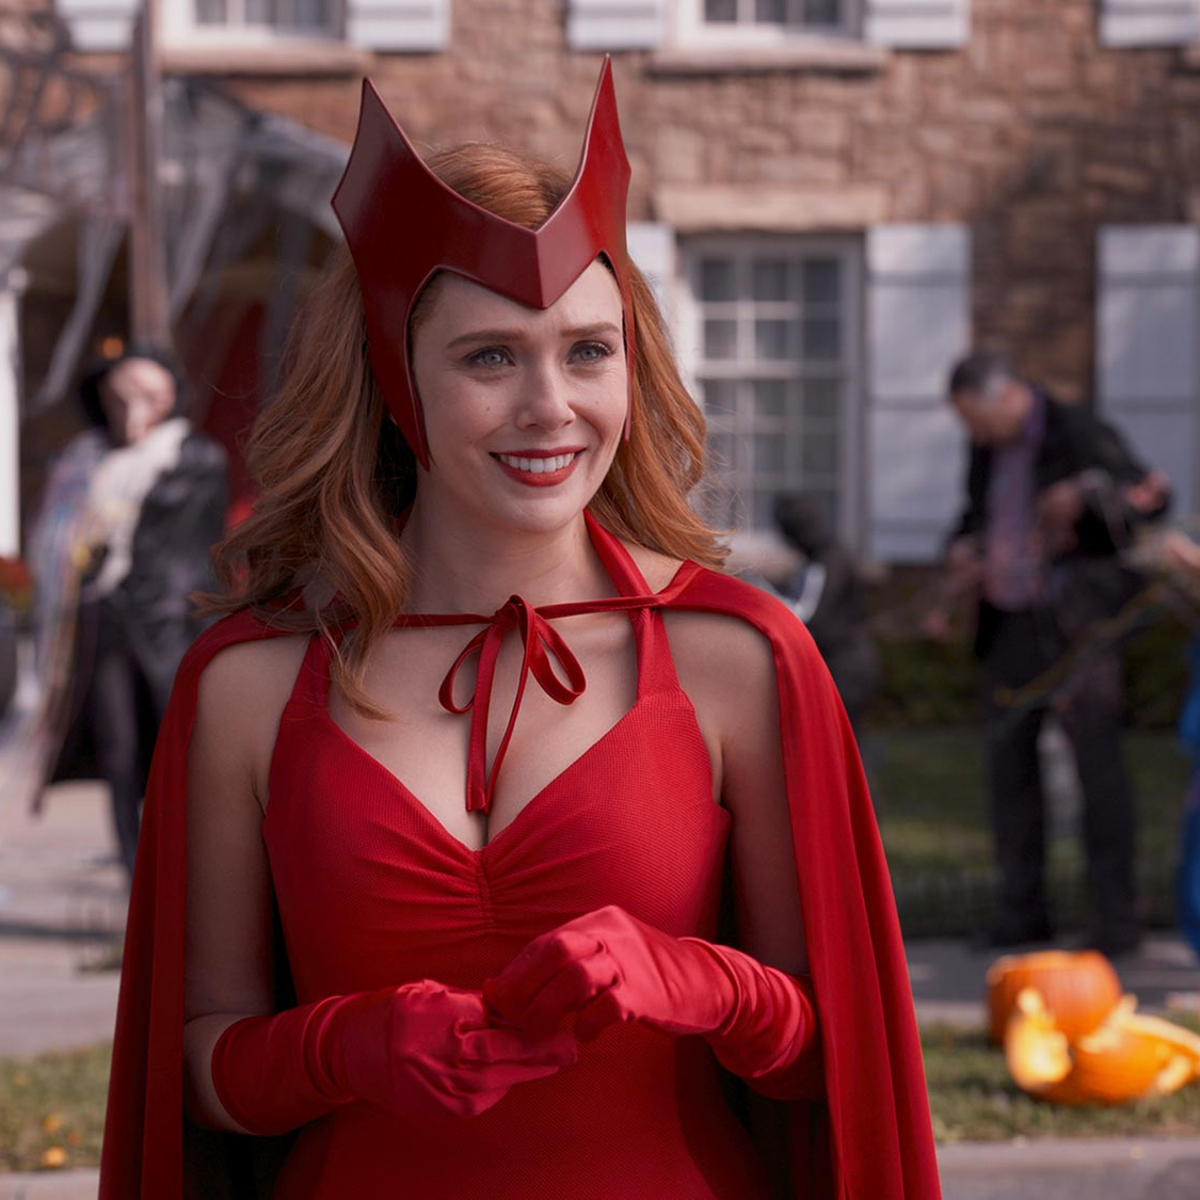 Marvel's Scarlet Witch: Here's how to cosplay as the MCU Wanda